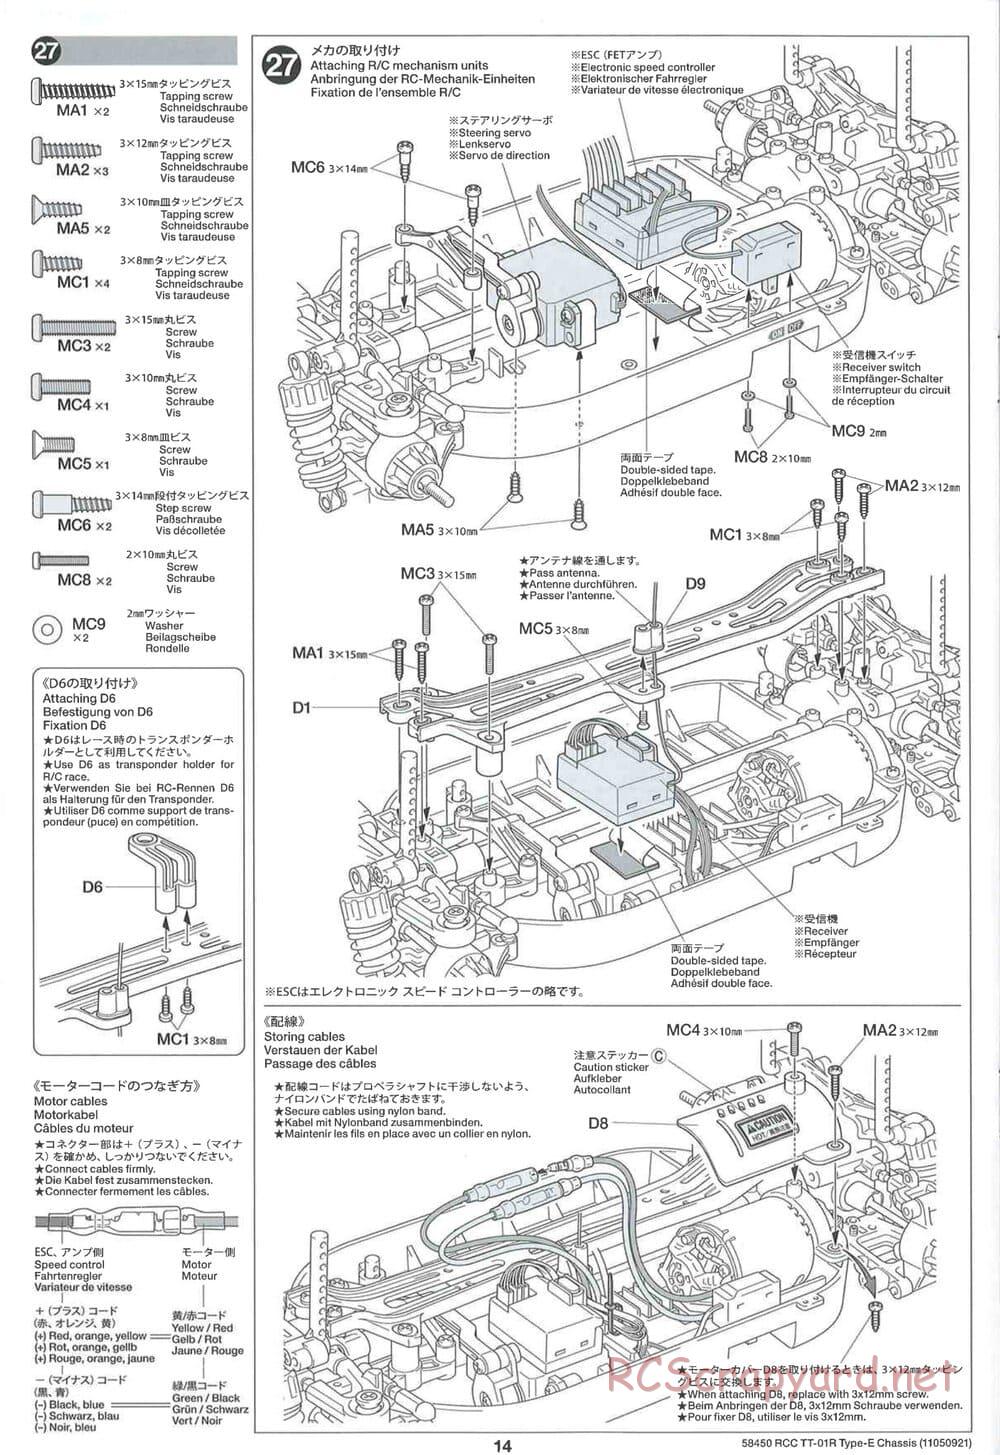 Tamiya - TT-01R Type-E Chassis - Manual - Page 14